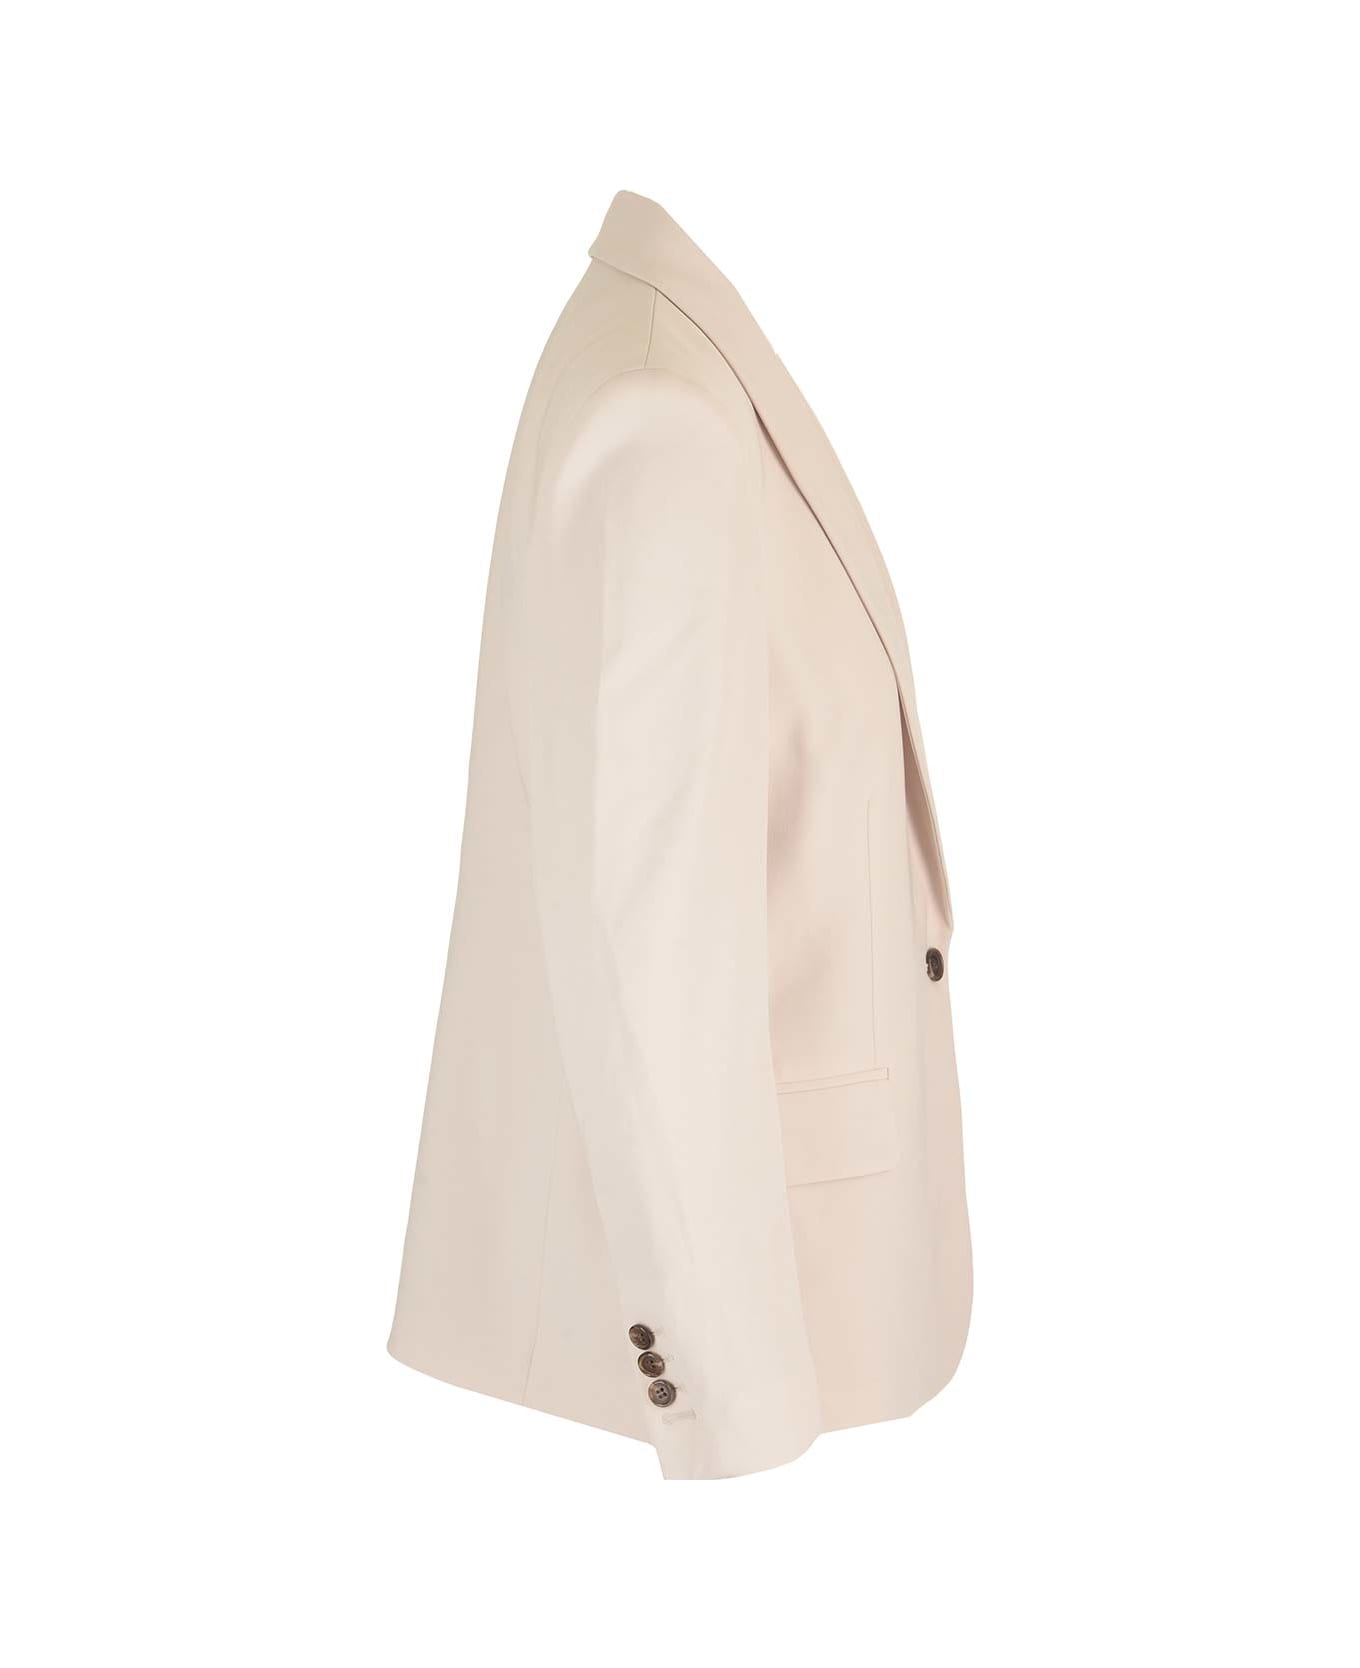 Theory Beige Single-breasted Jacket - Pearl